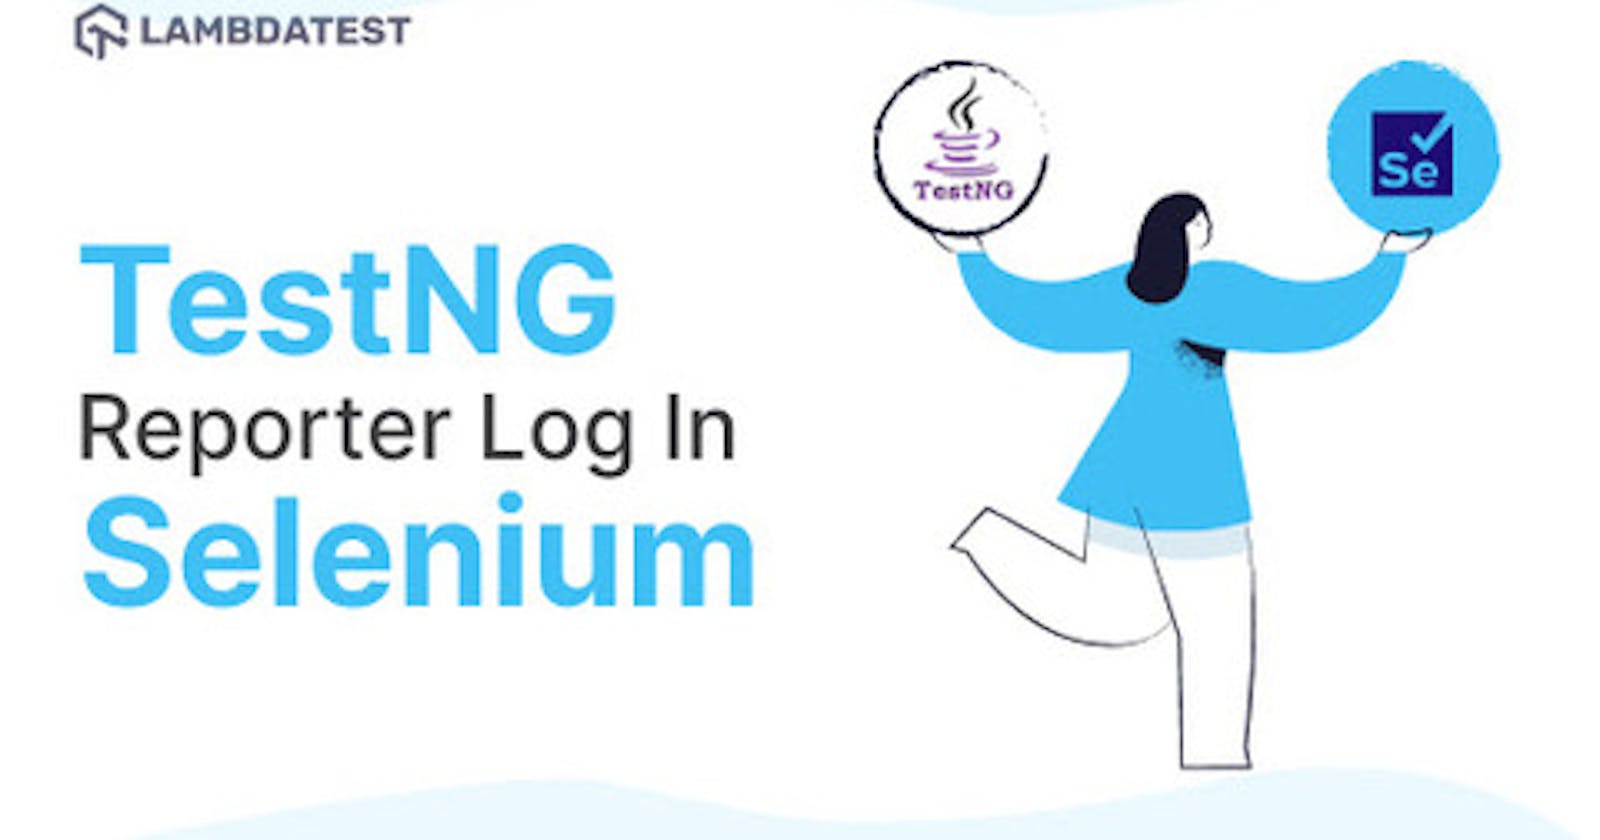 How To Use TestNG Reporter Log In Selenium